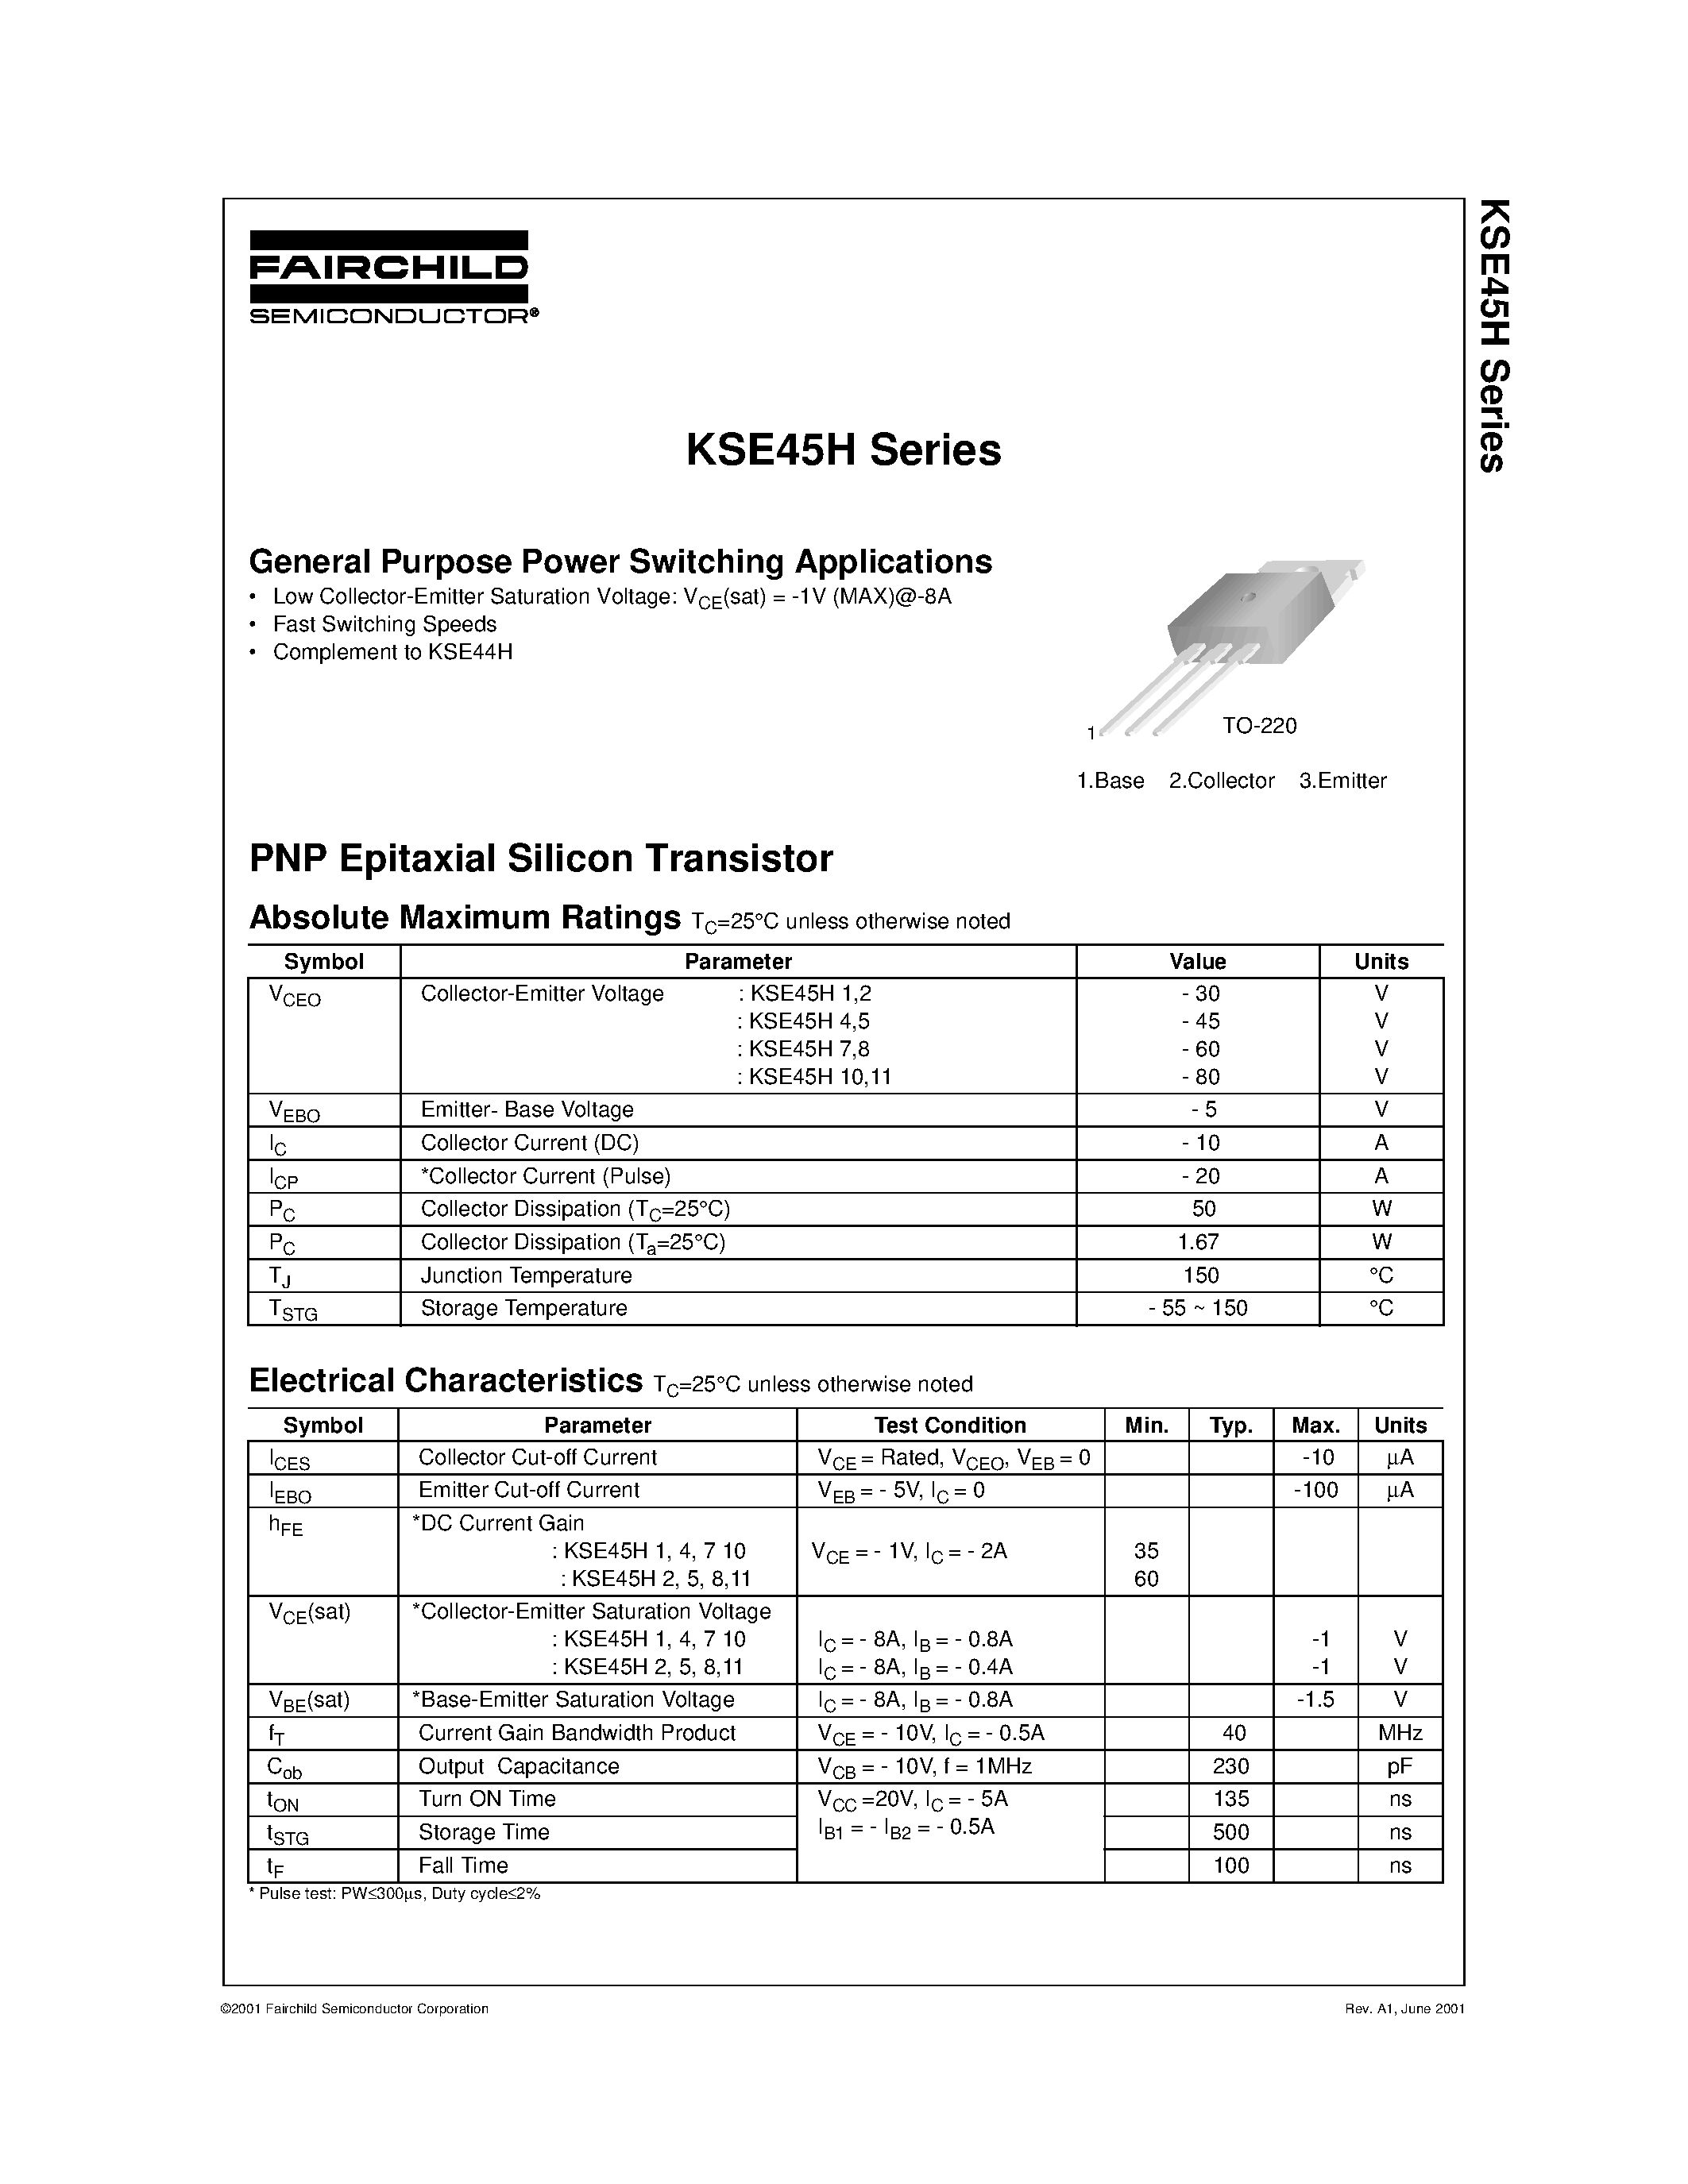 Даташит KSE45H1 - General Purpose Power Switching Applications страница 1